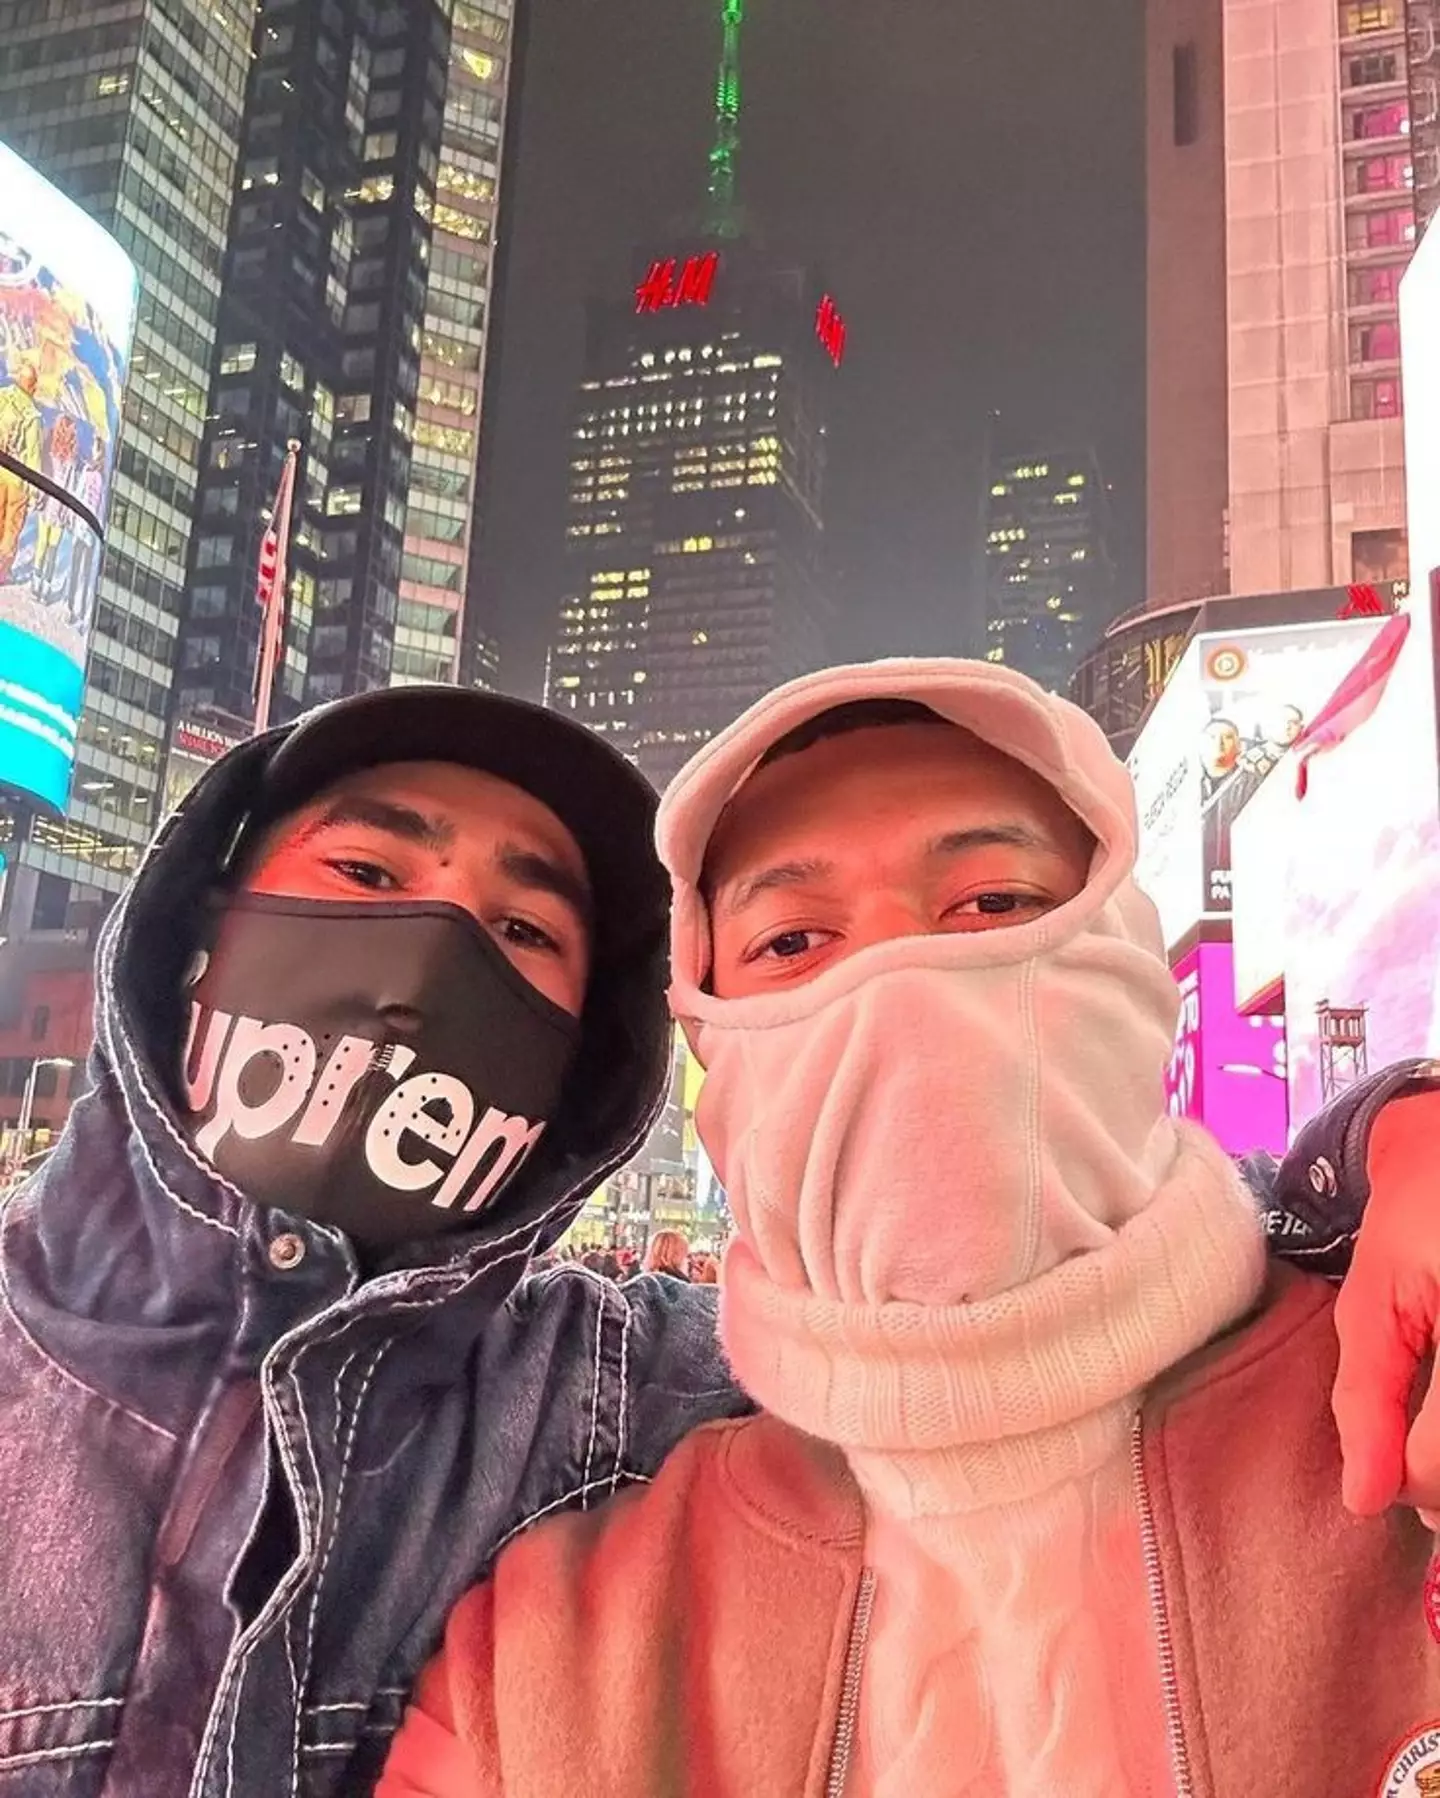 Kylian Mbappe and Achraf Hakimi in New York. Image credit: Instagram/k.mbappe